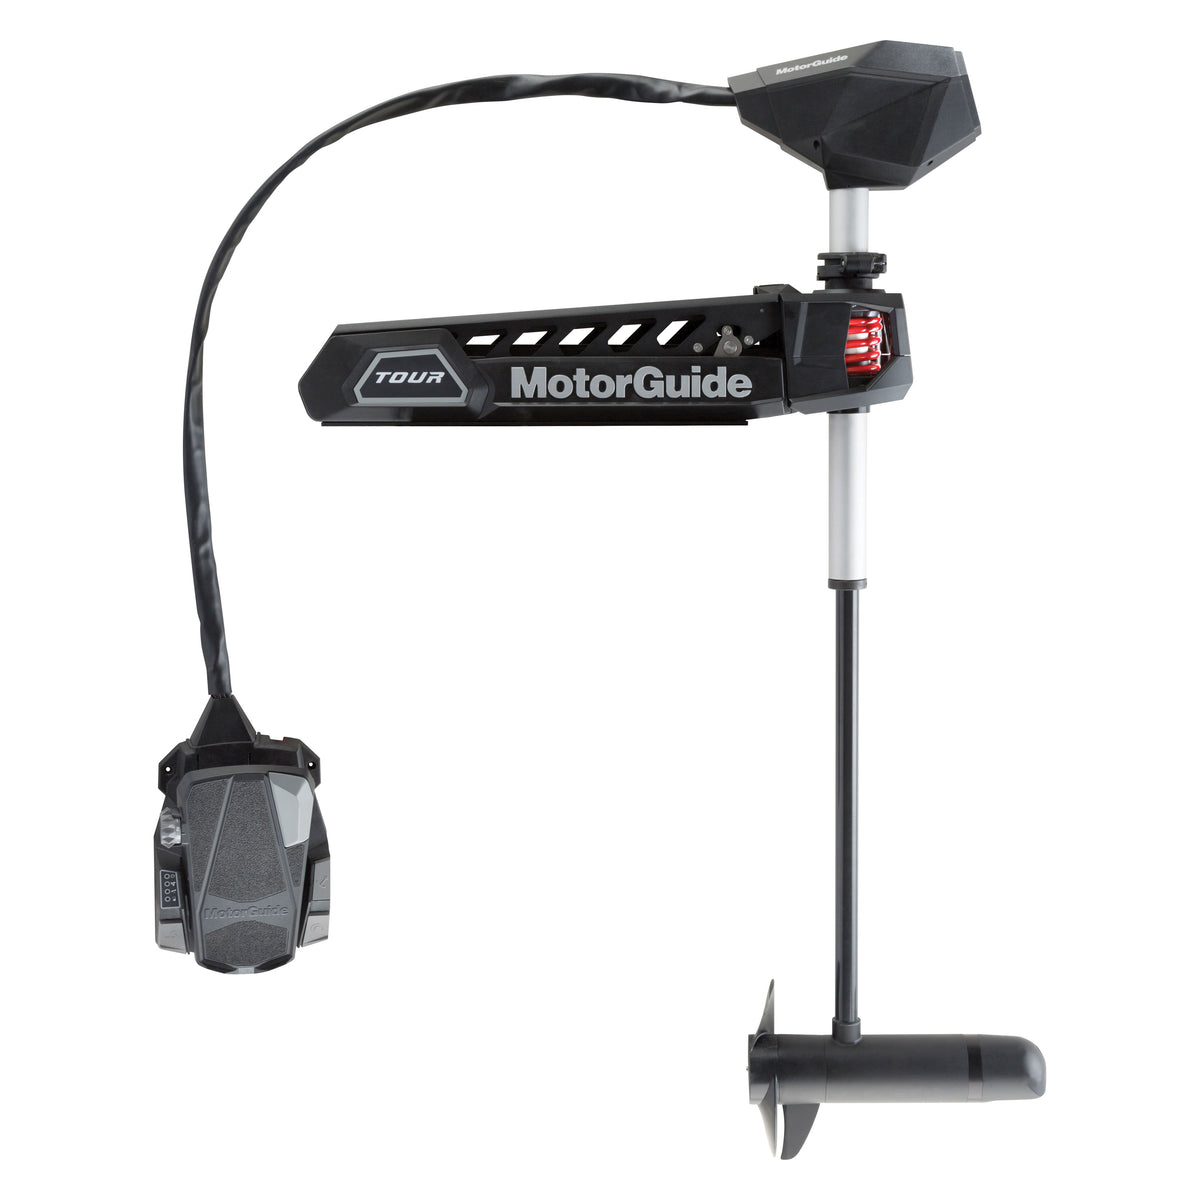 MotorGuide 941900030 Tour Pro Trolling Motor TR PRO-109 45" with Pinpoint GPS - 36V